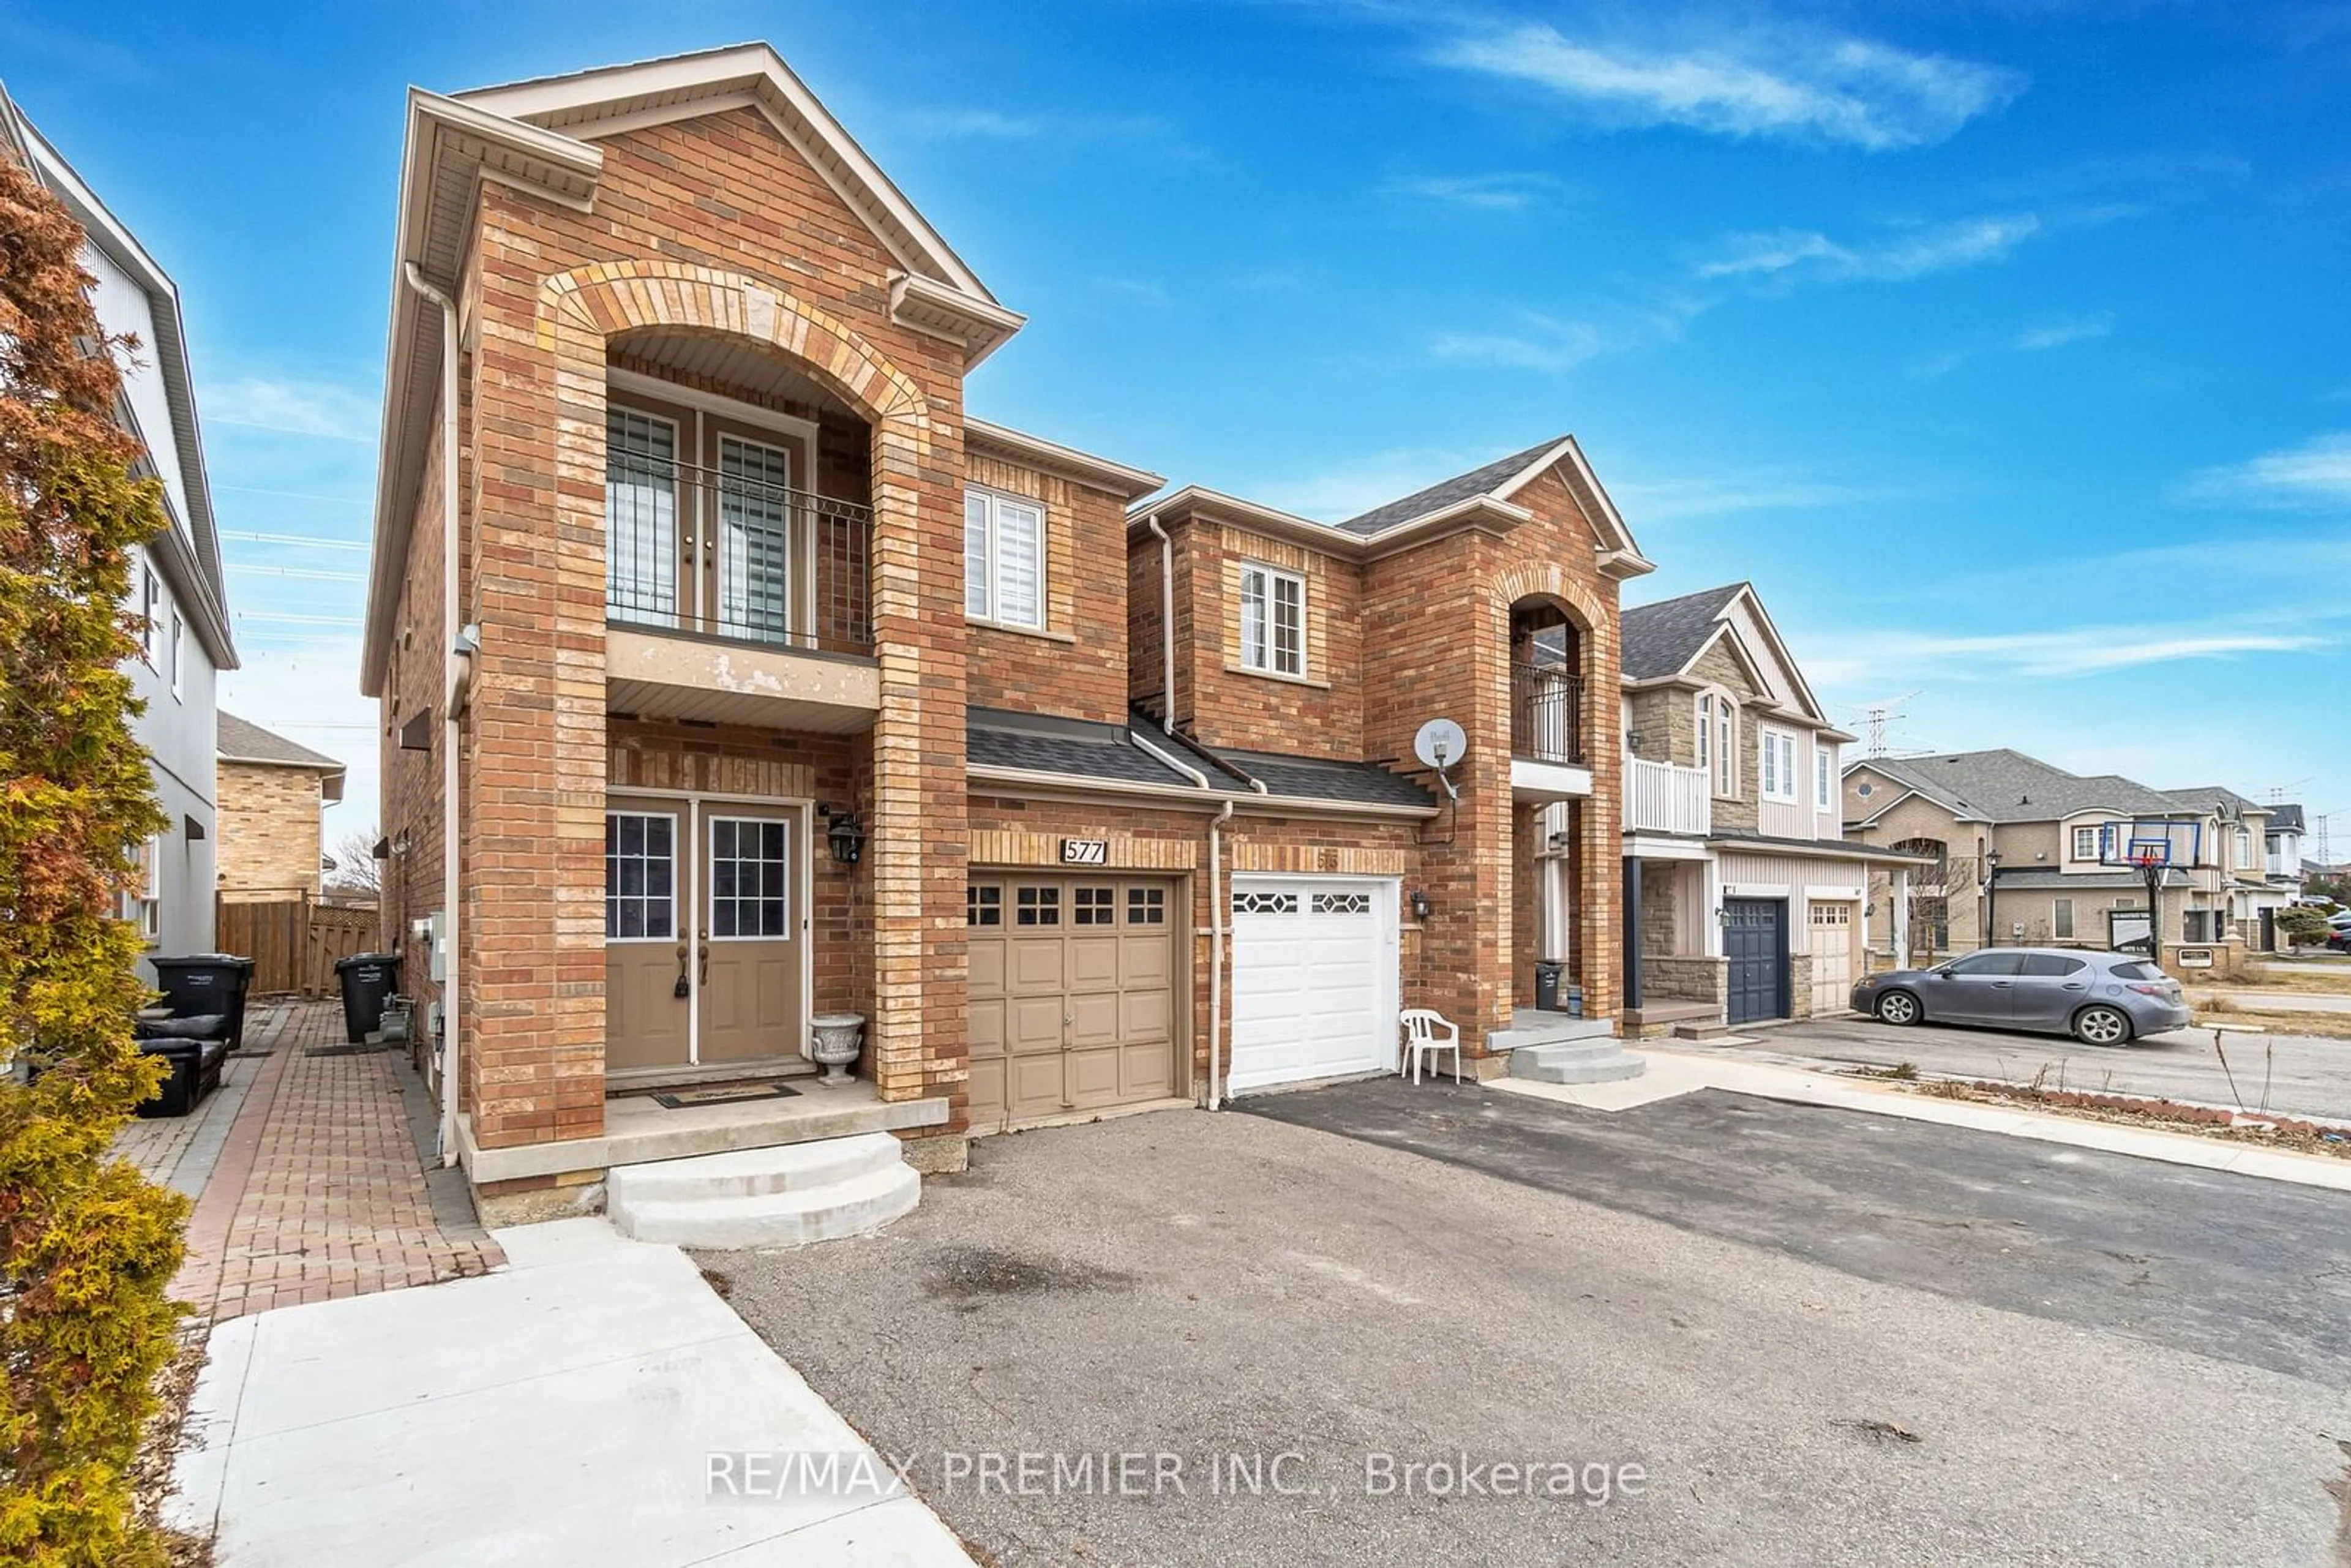 A pic from exterior of the house or condo for 577 Rossellini Dr, Mississauga Ontario L5W 1M5